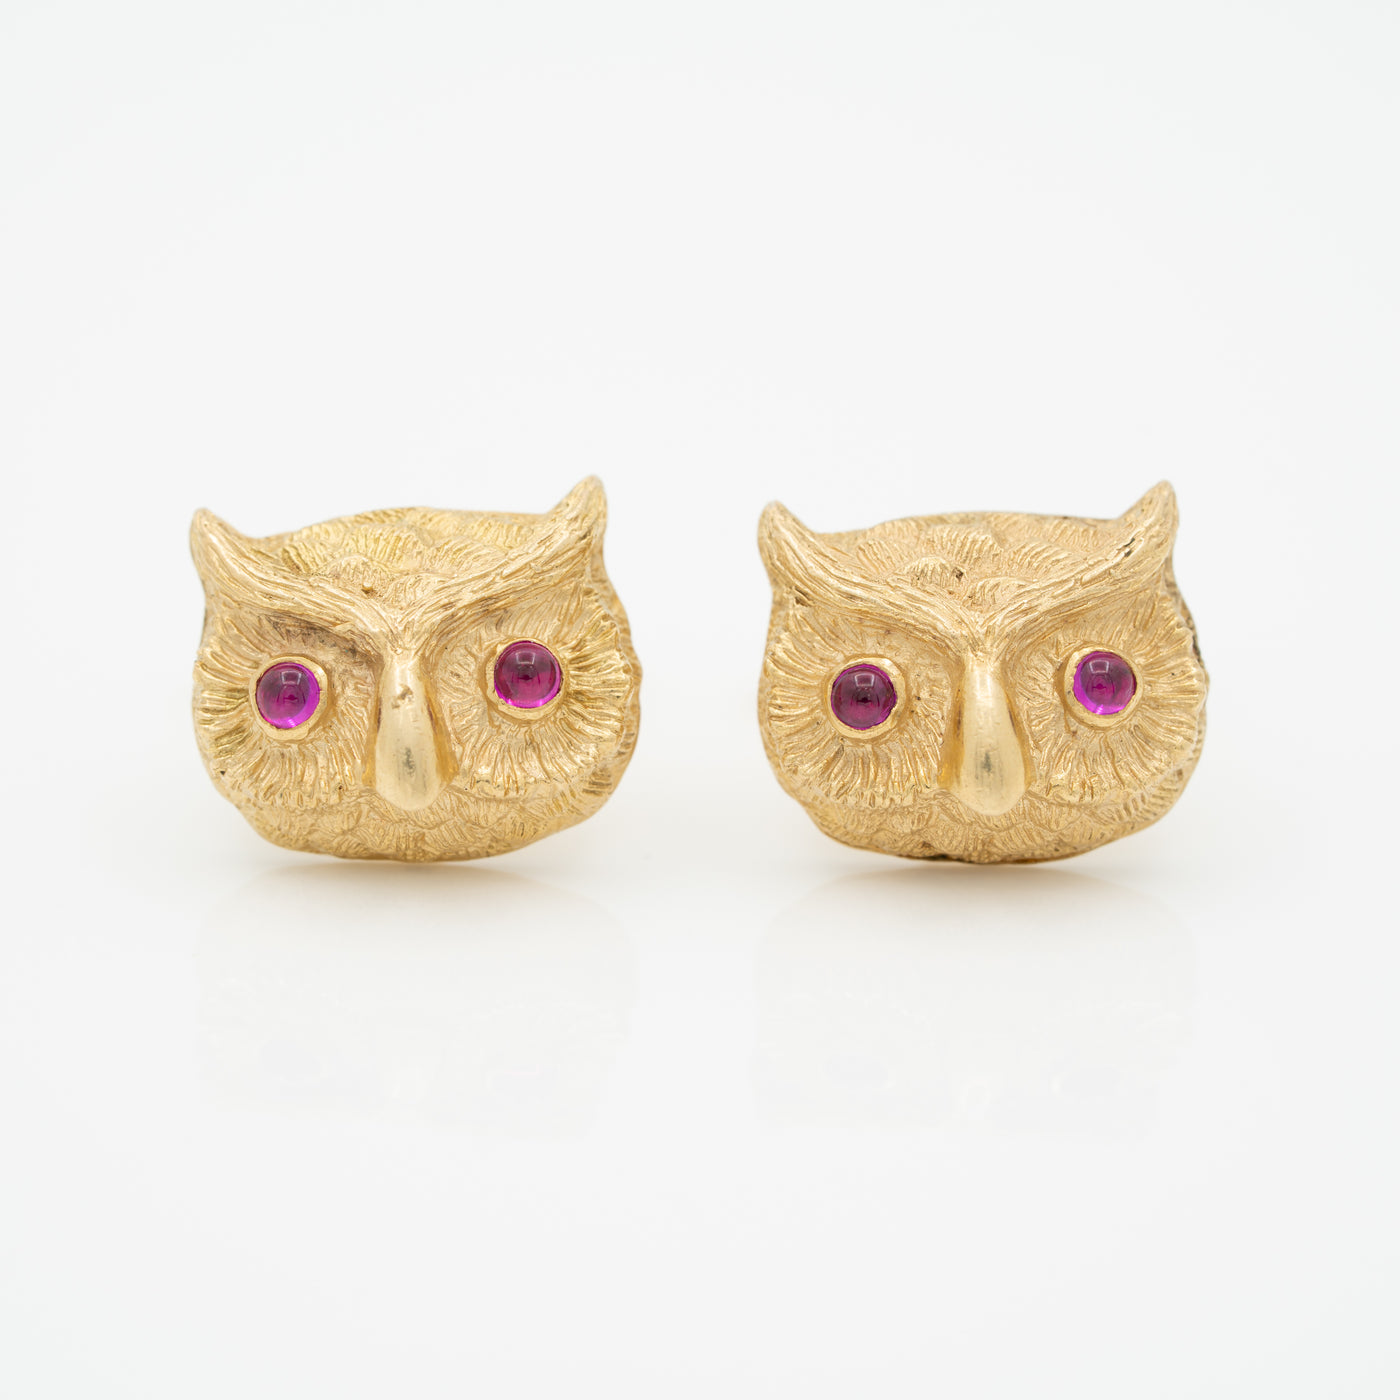 VINTAGE 14K YELLOW GOLD AND CABOCHON RUBY OWL CUFFLINKS c.1940s